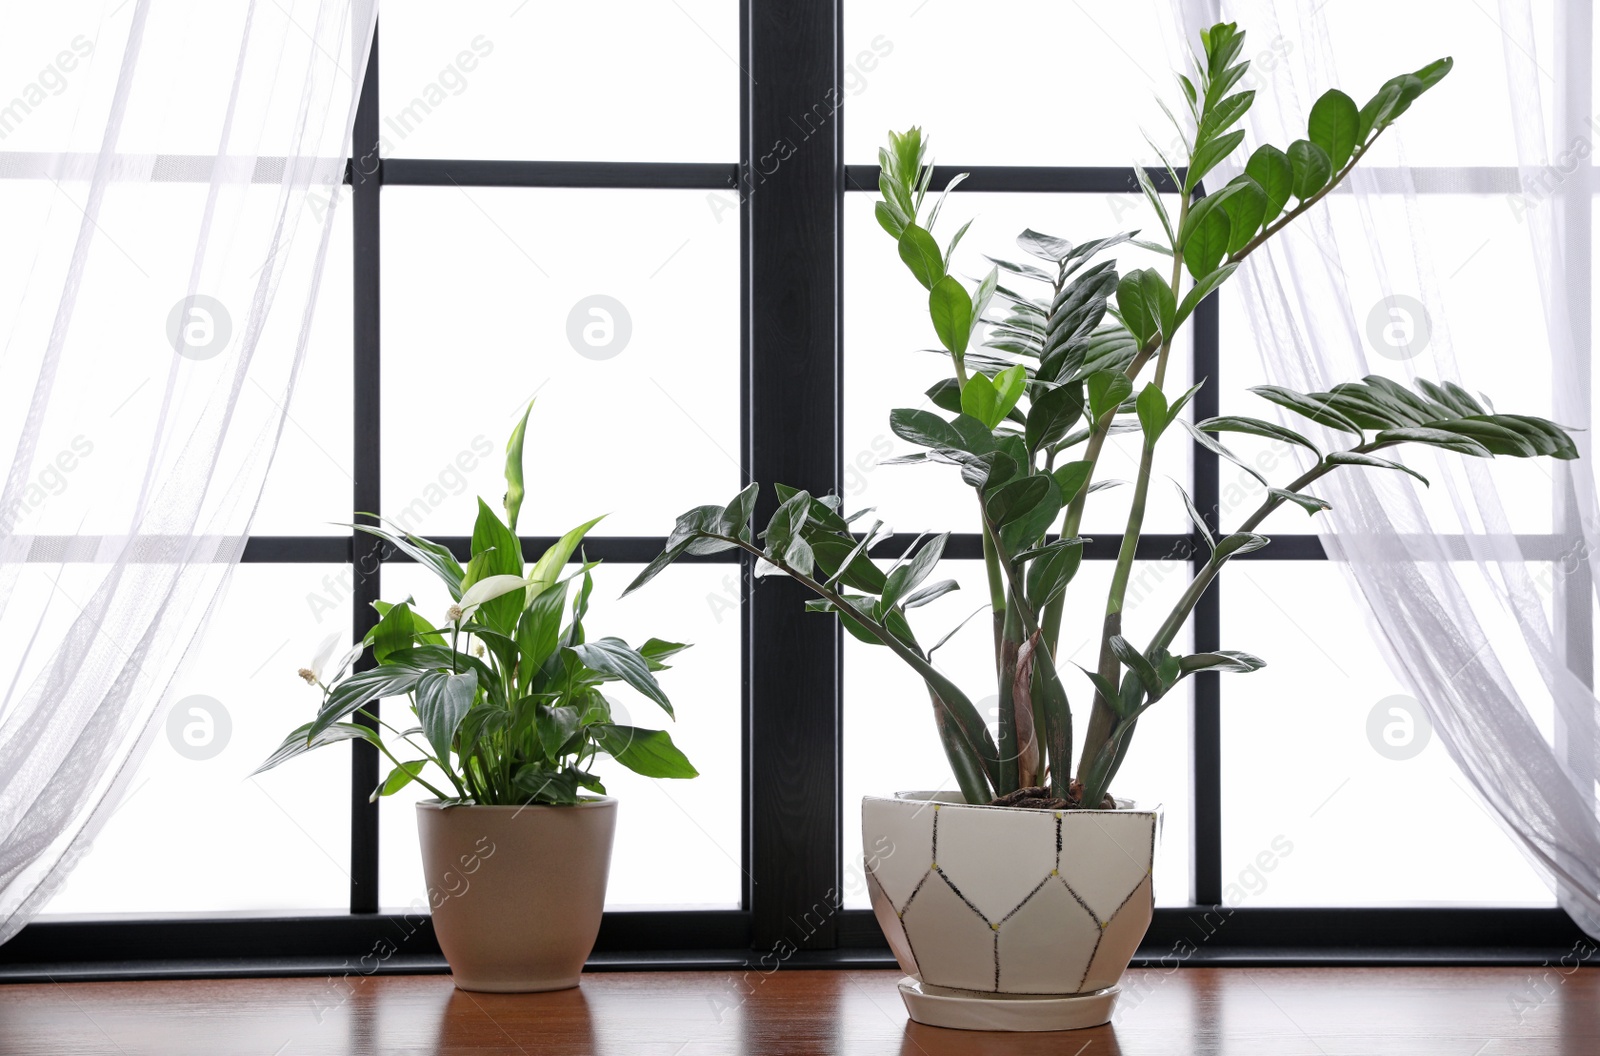 Photo of Different green potted plants on window sill at home